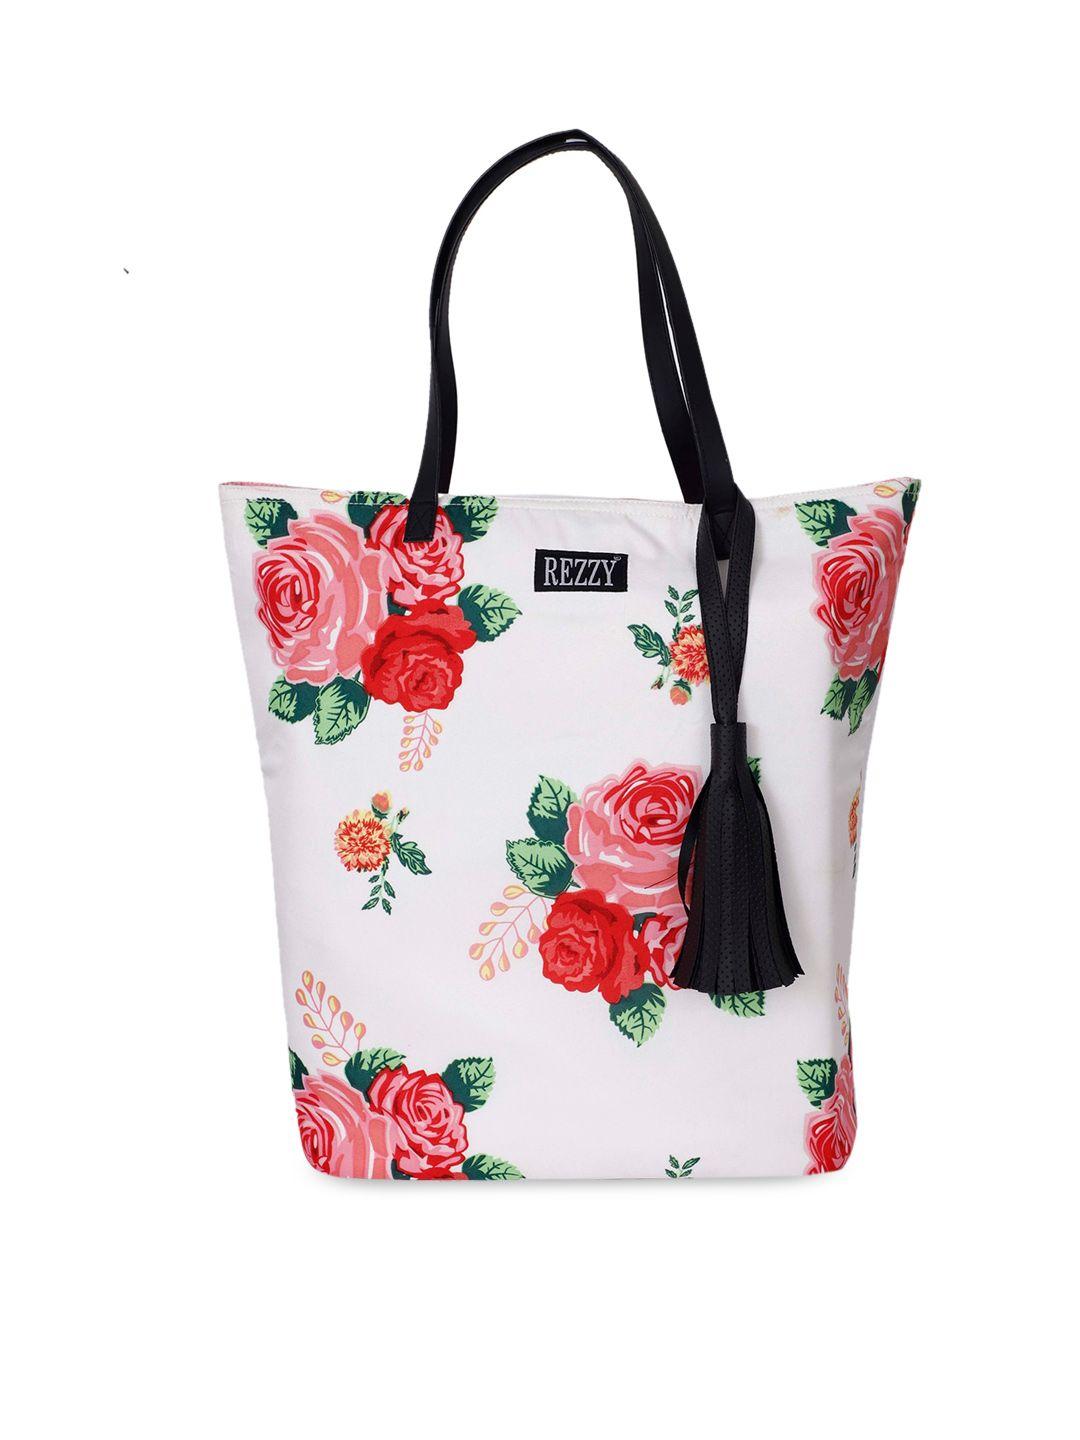 rezzy white & red printed tote bag